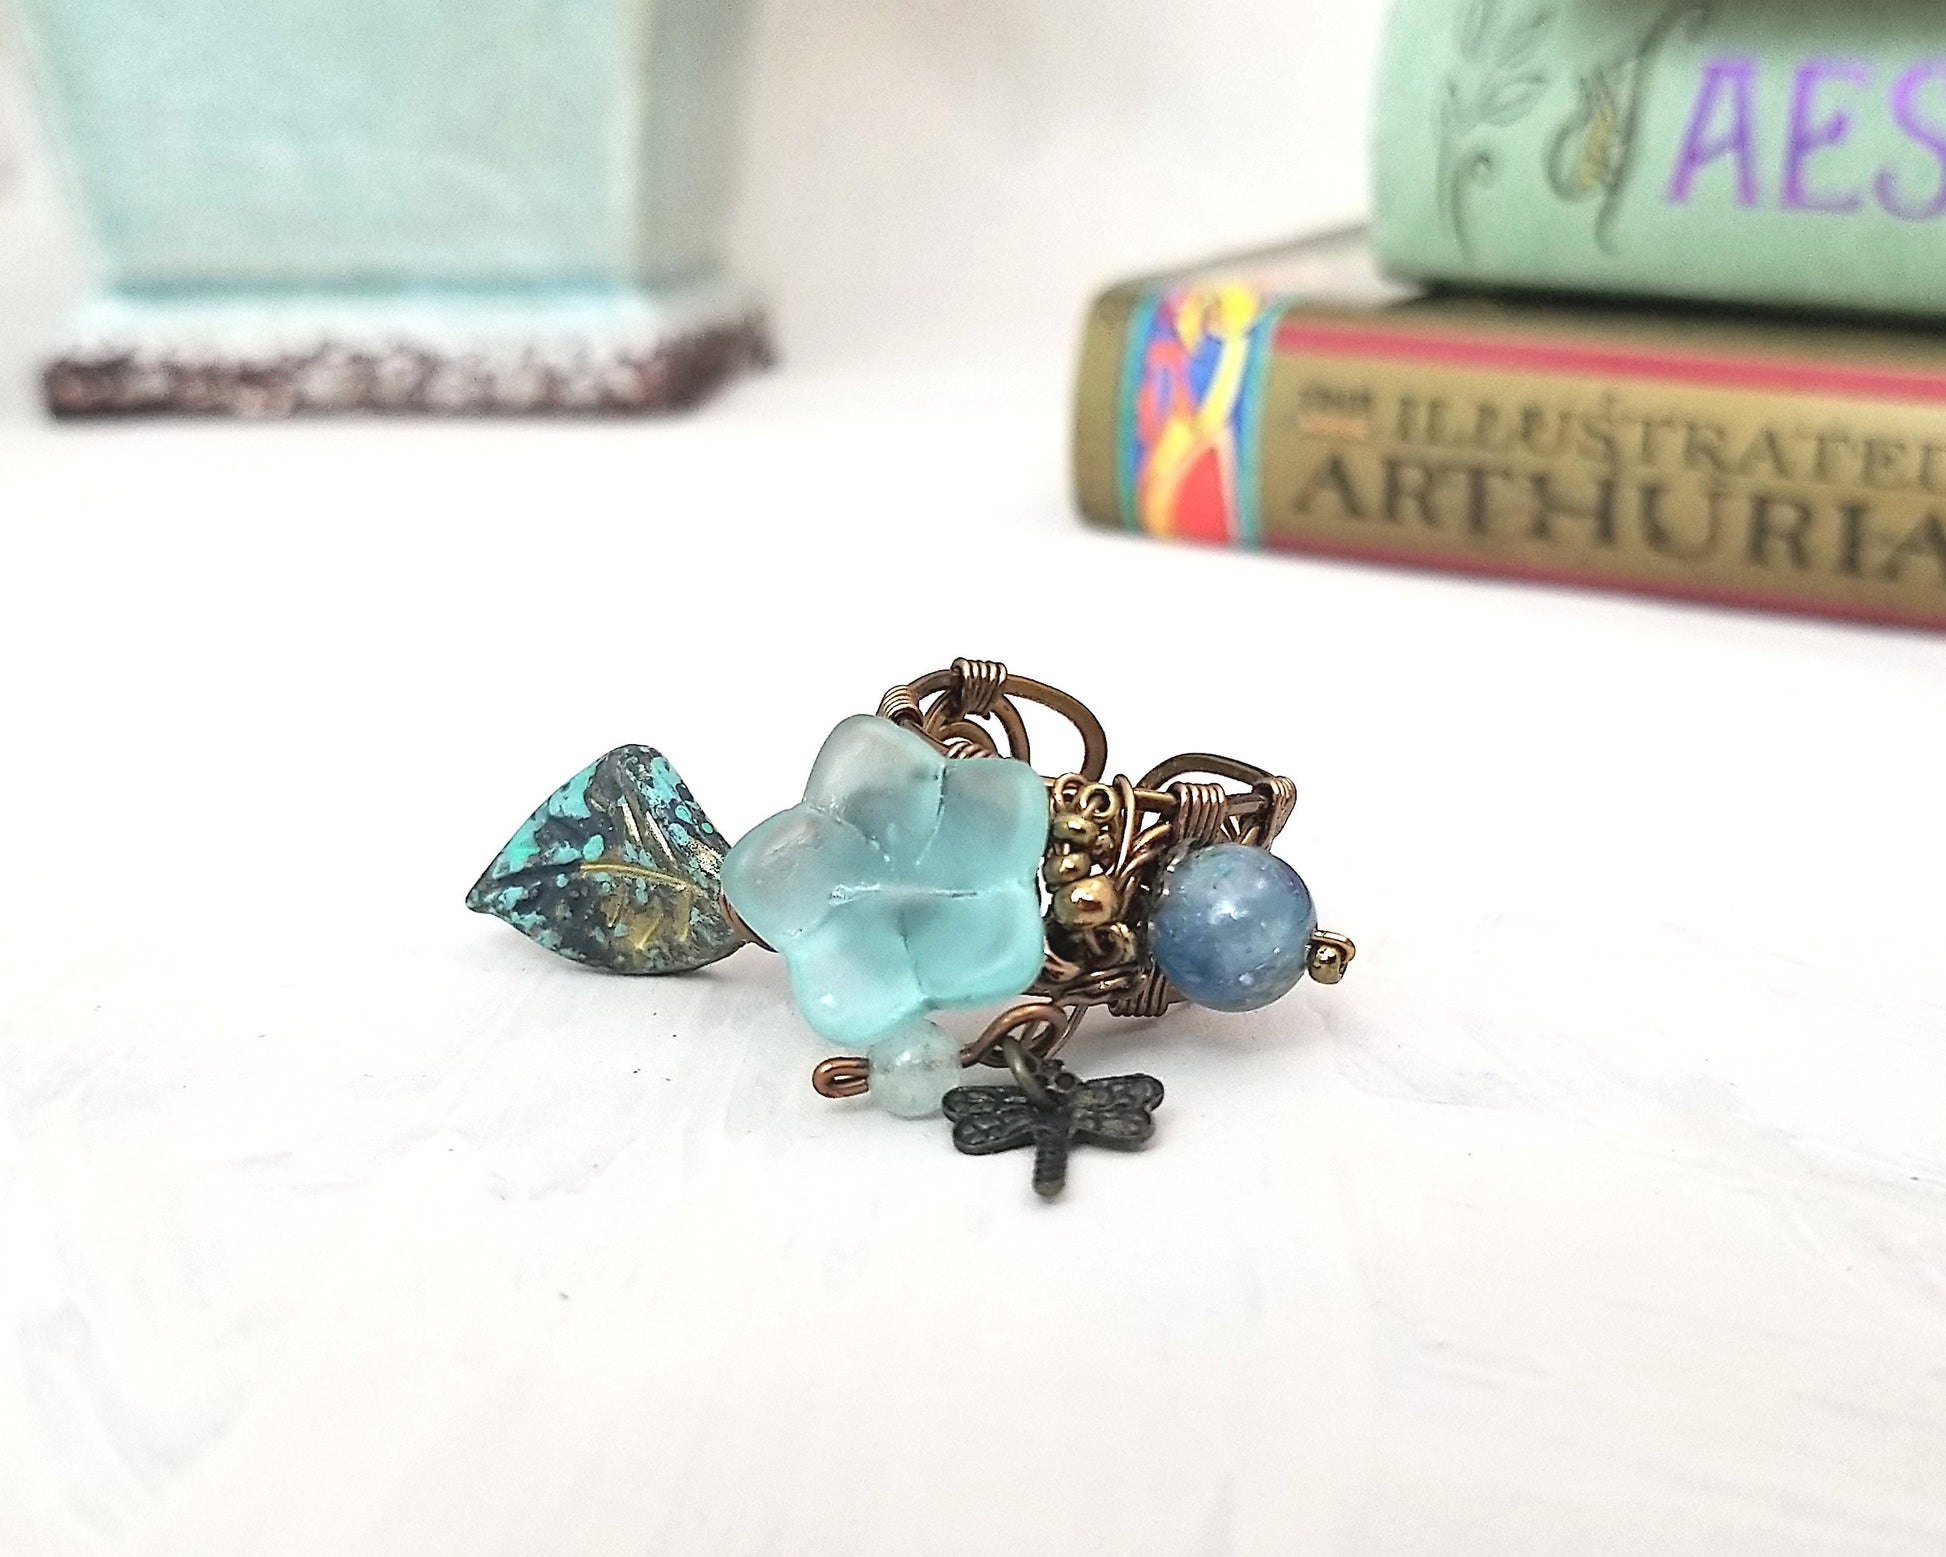 Fairytale Forest Fantasy Floral Ring in Teal/Aqua/Sky Blue Renaissance Adjustable Wire #1349